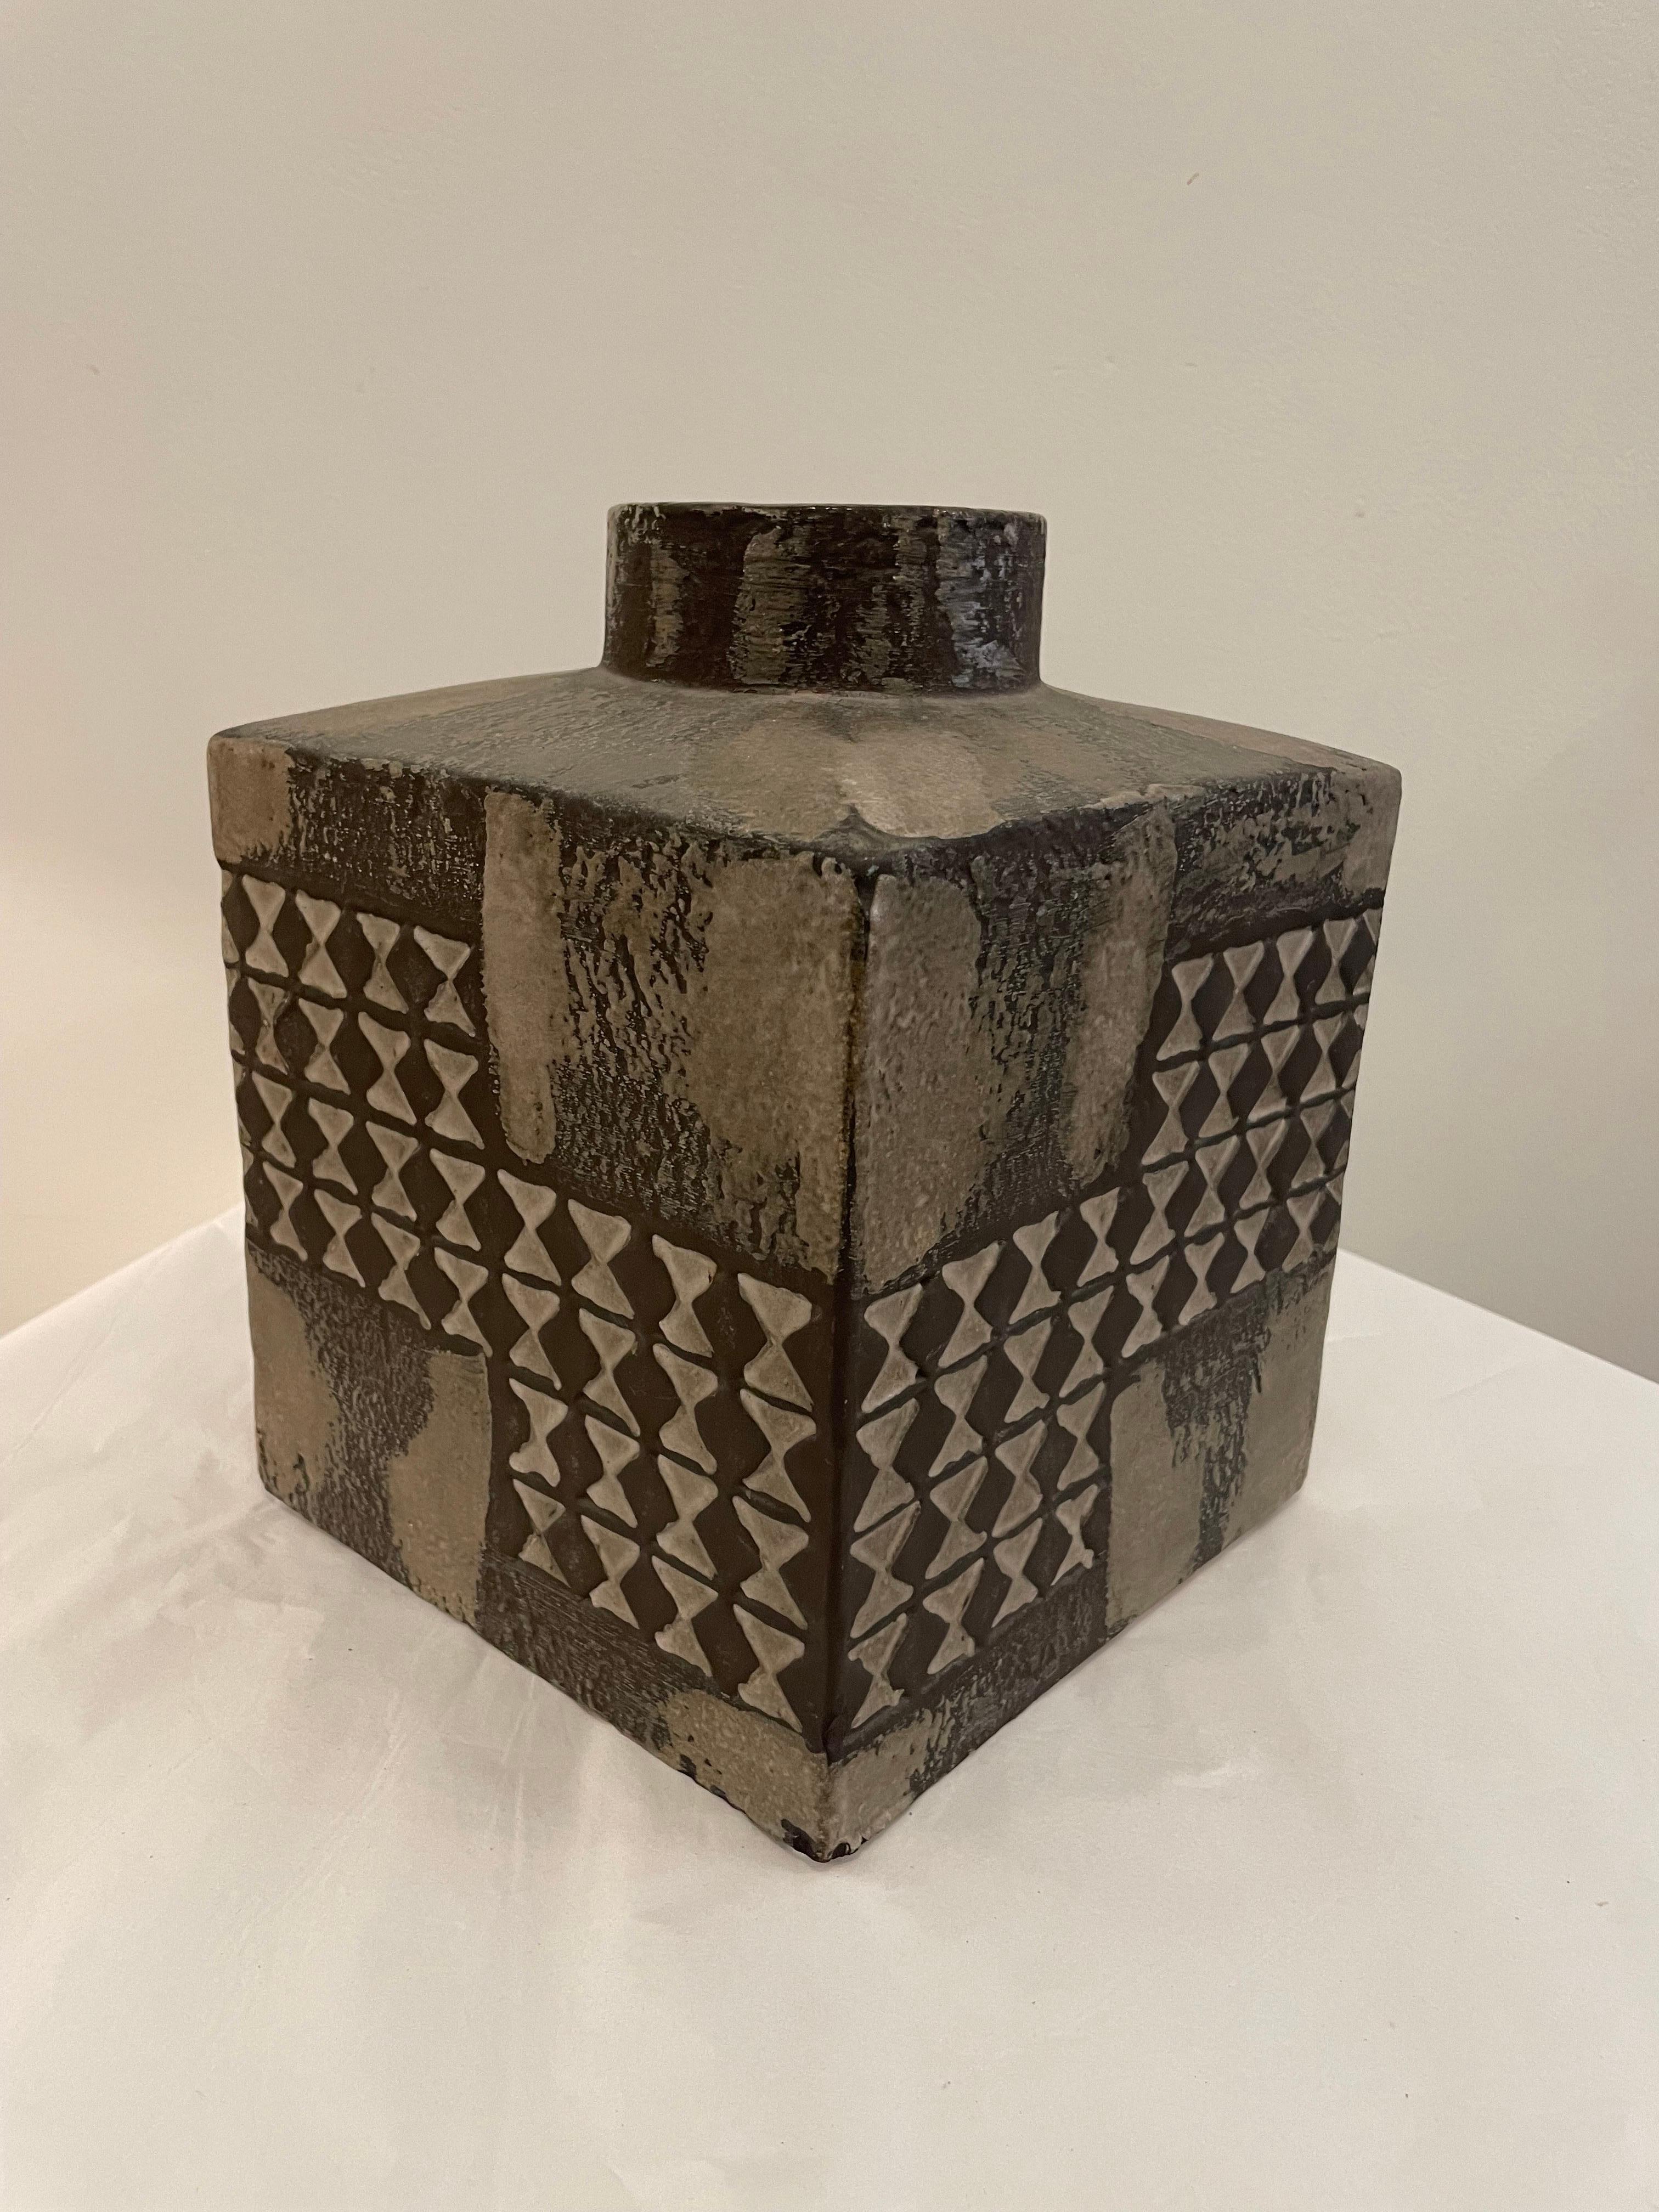 Wonderful textured finish square vase in lava gray finish with geometric shapes and style.